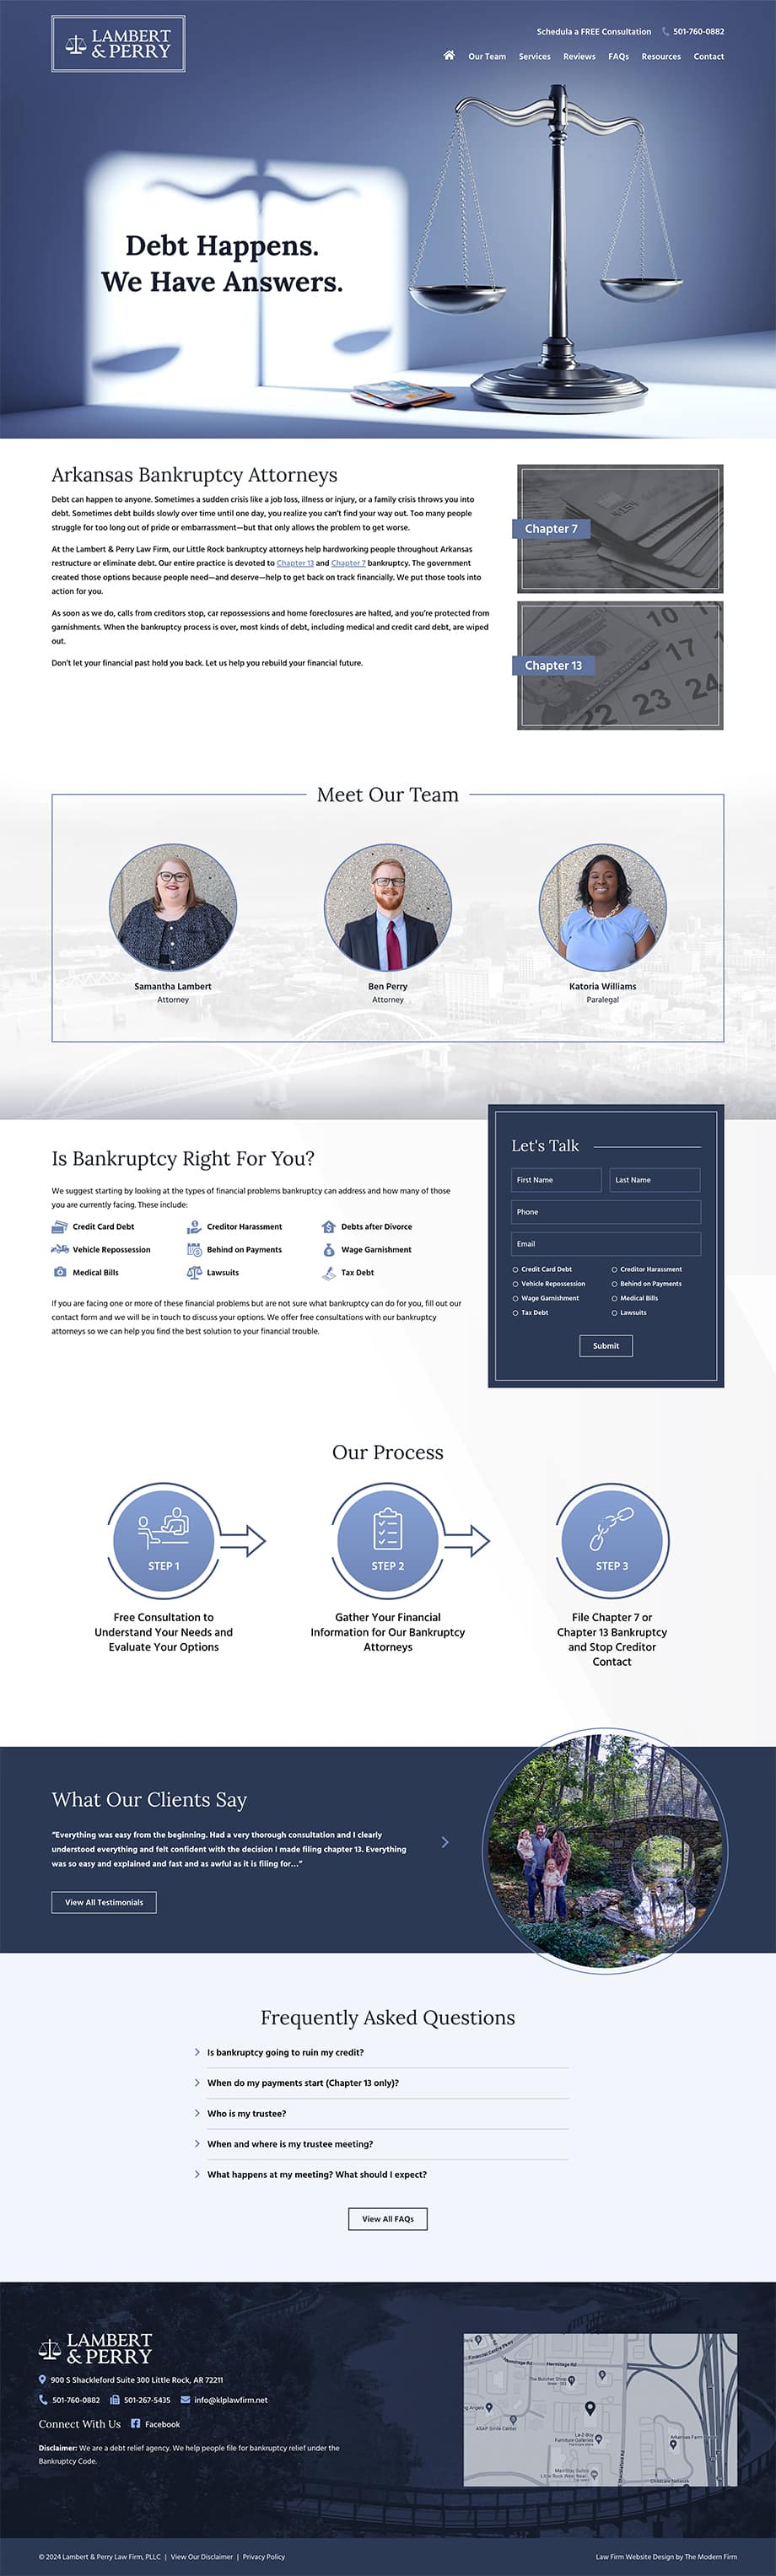 Law Firm Website Design for Lambert & Perry Law Firm, PLLC 